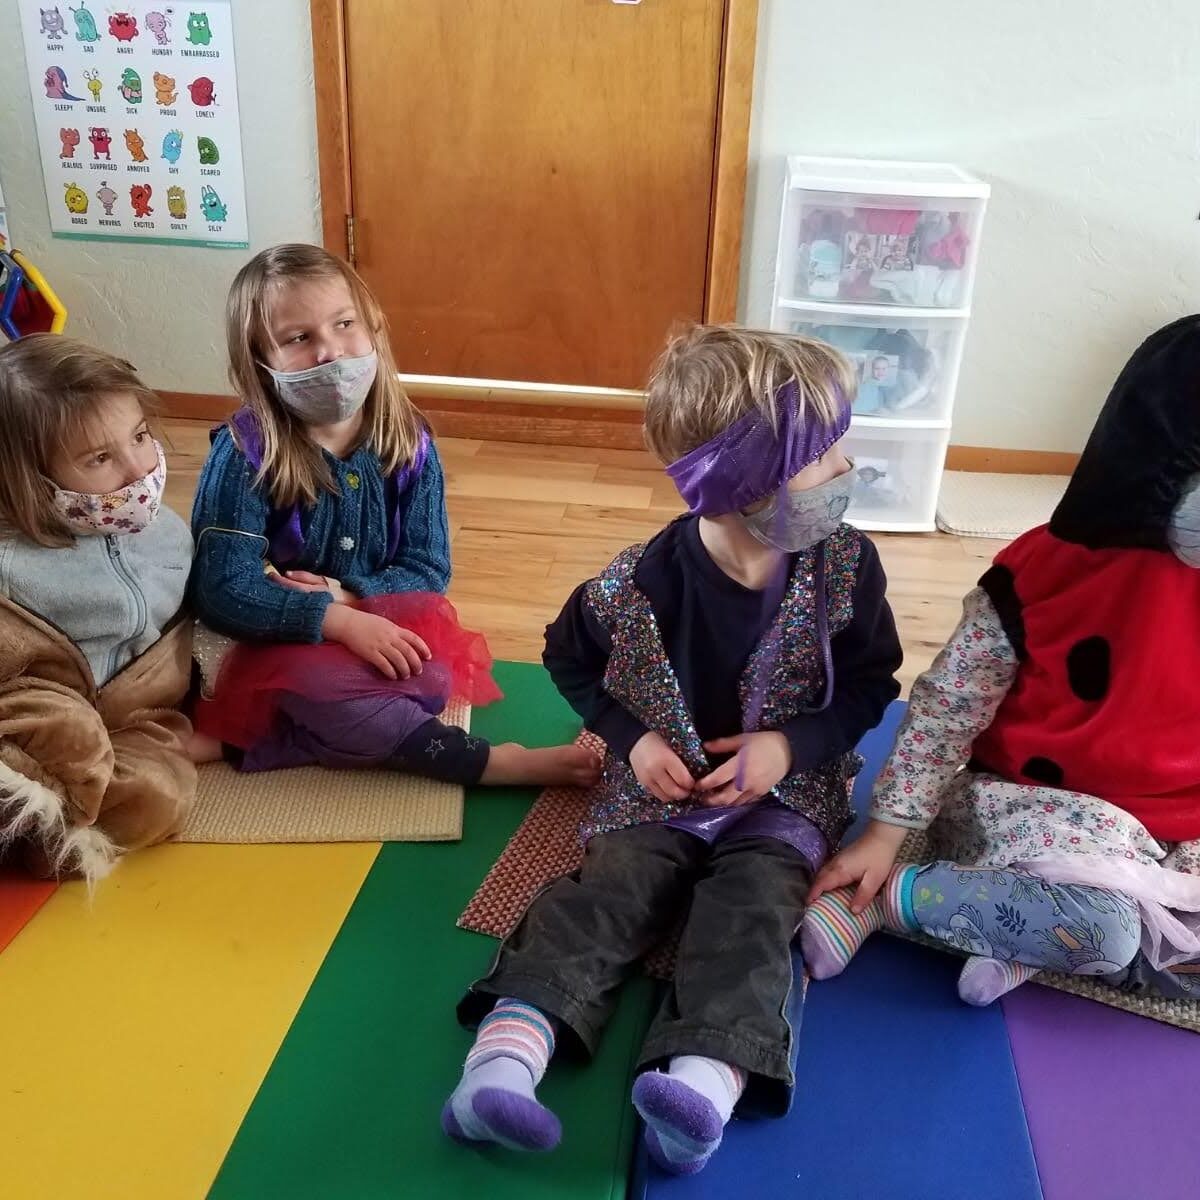 A group of children sitting on the floor.